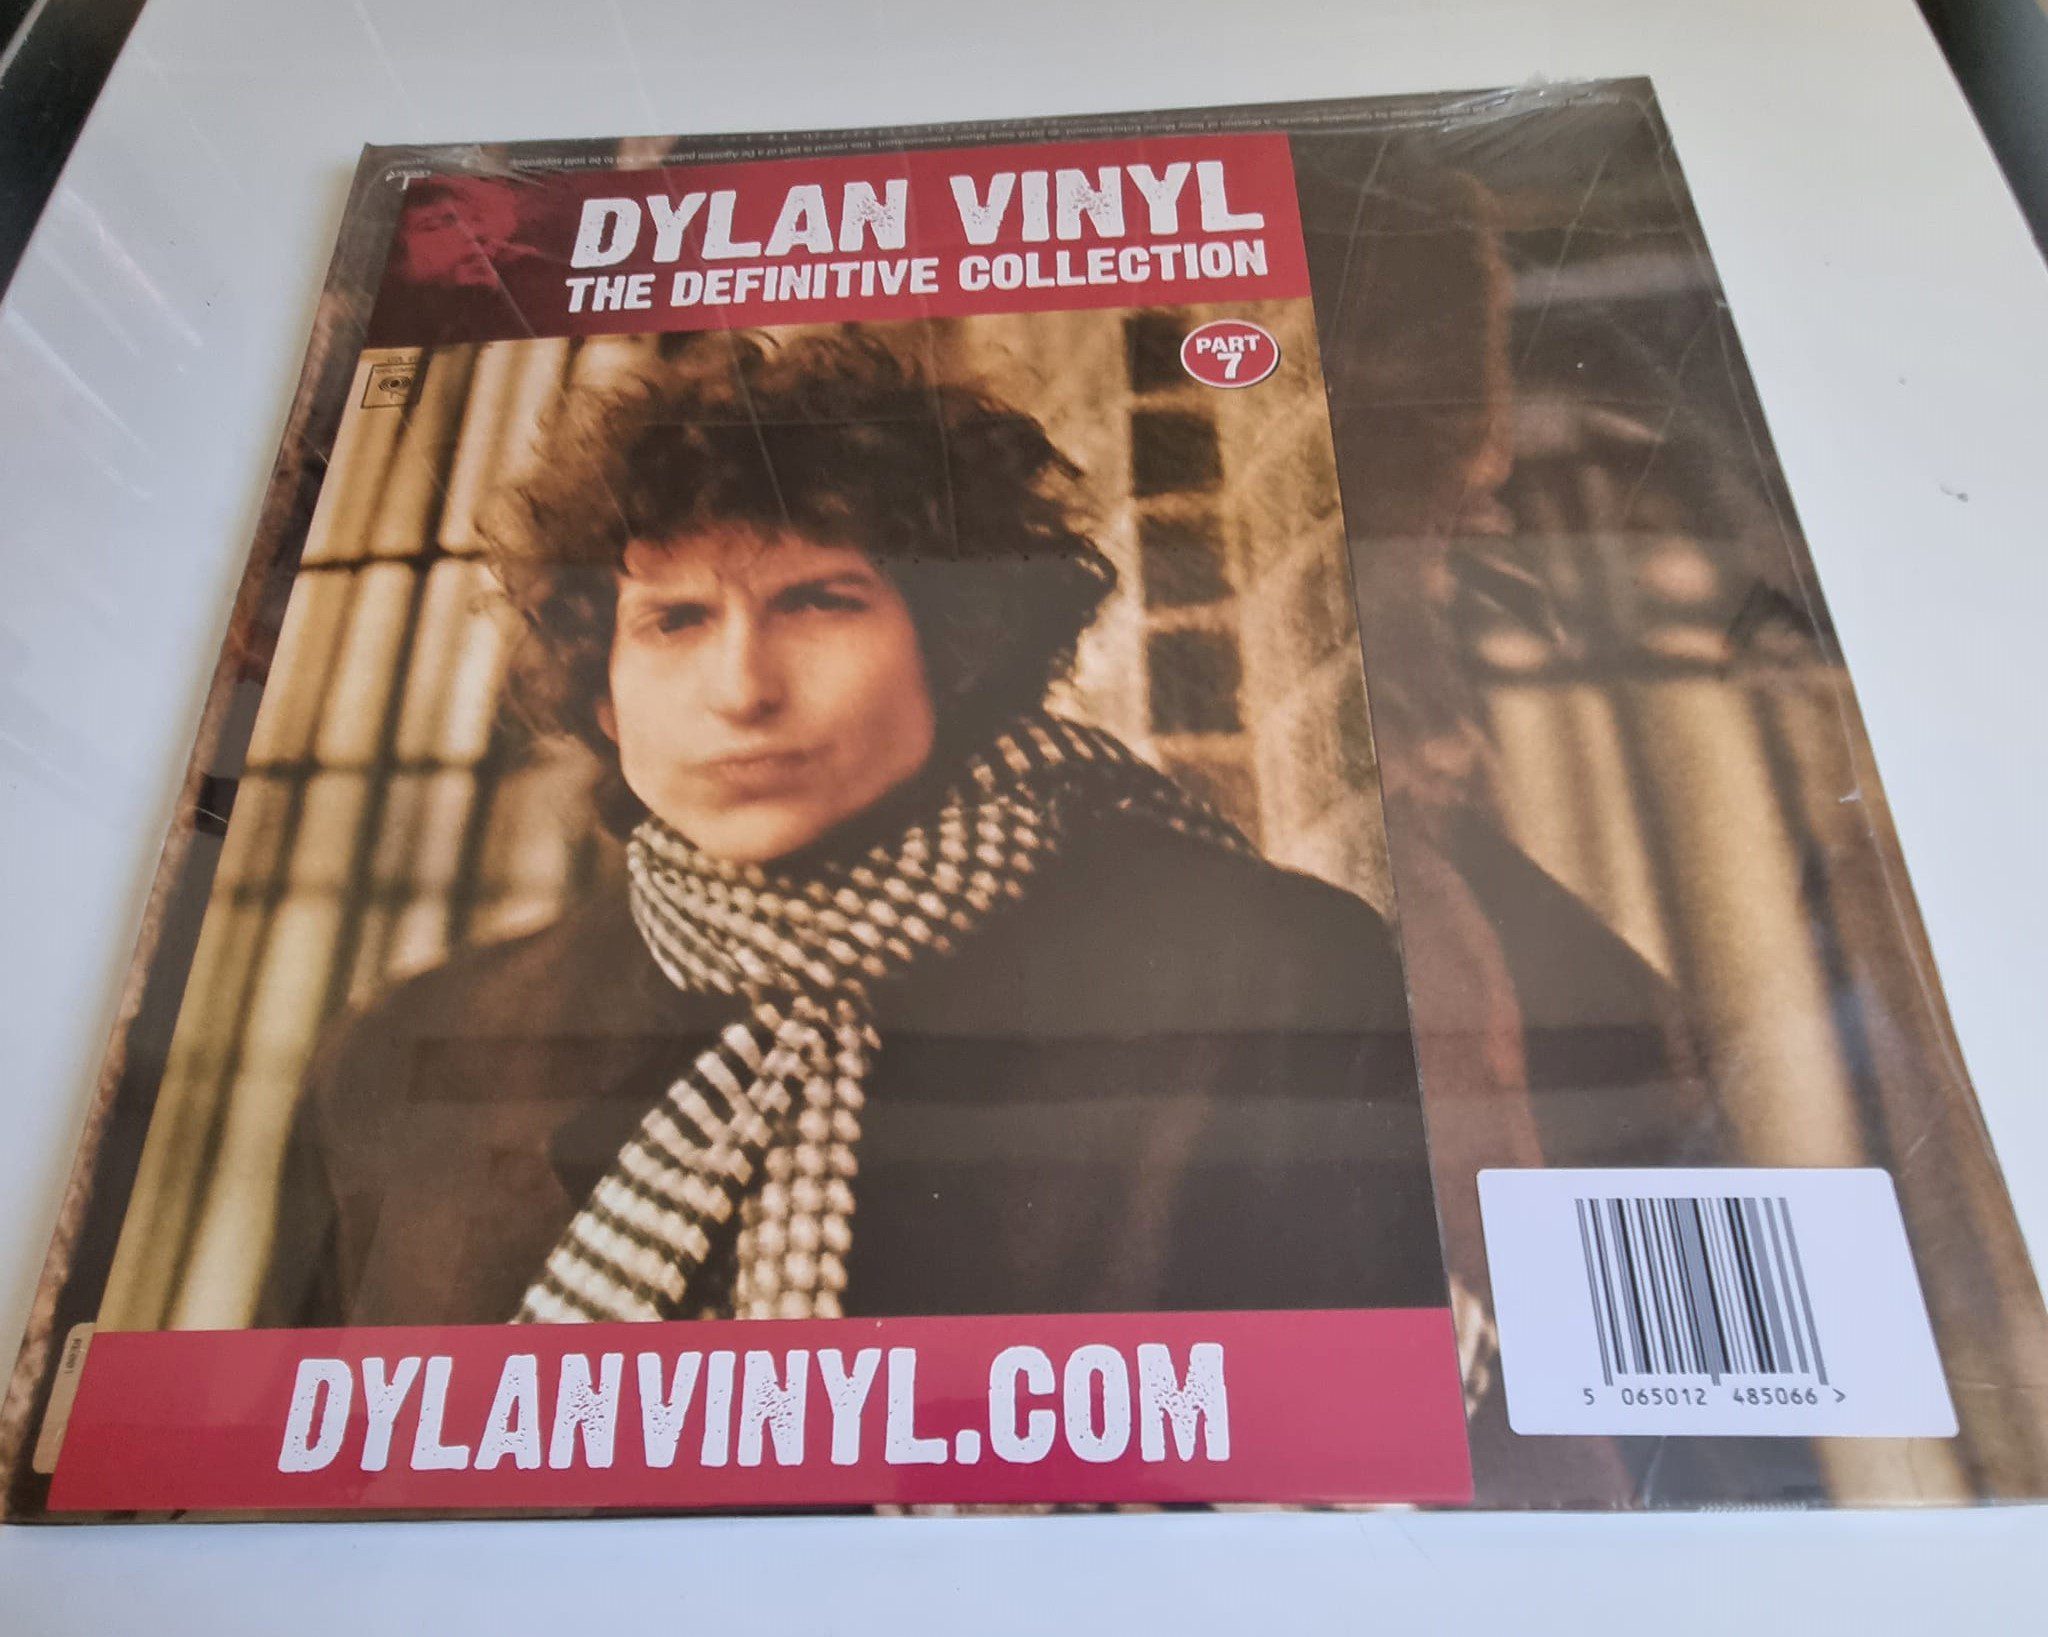 Buy this rare Bob Dylan record by clicking here